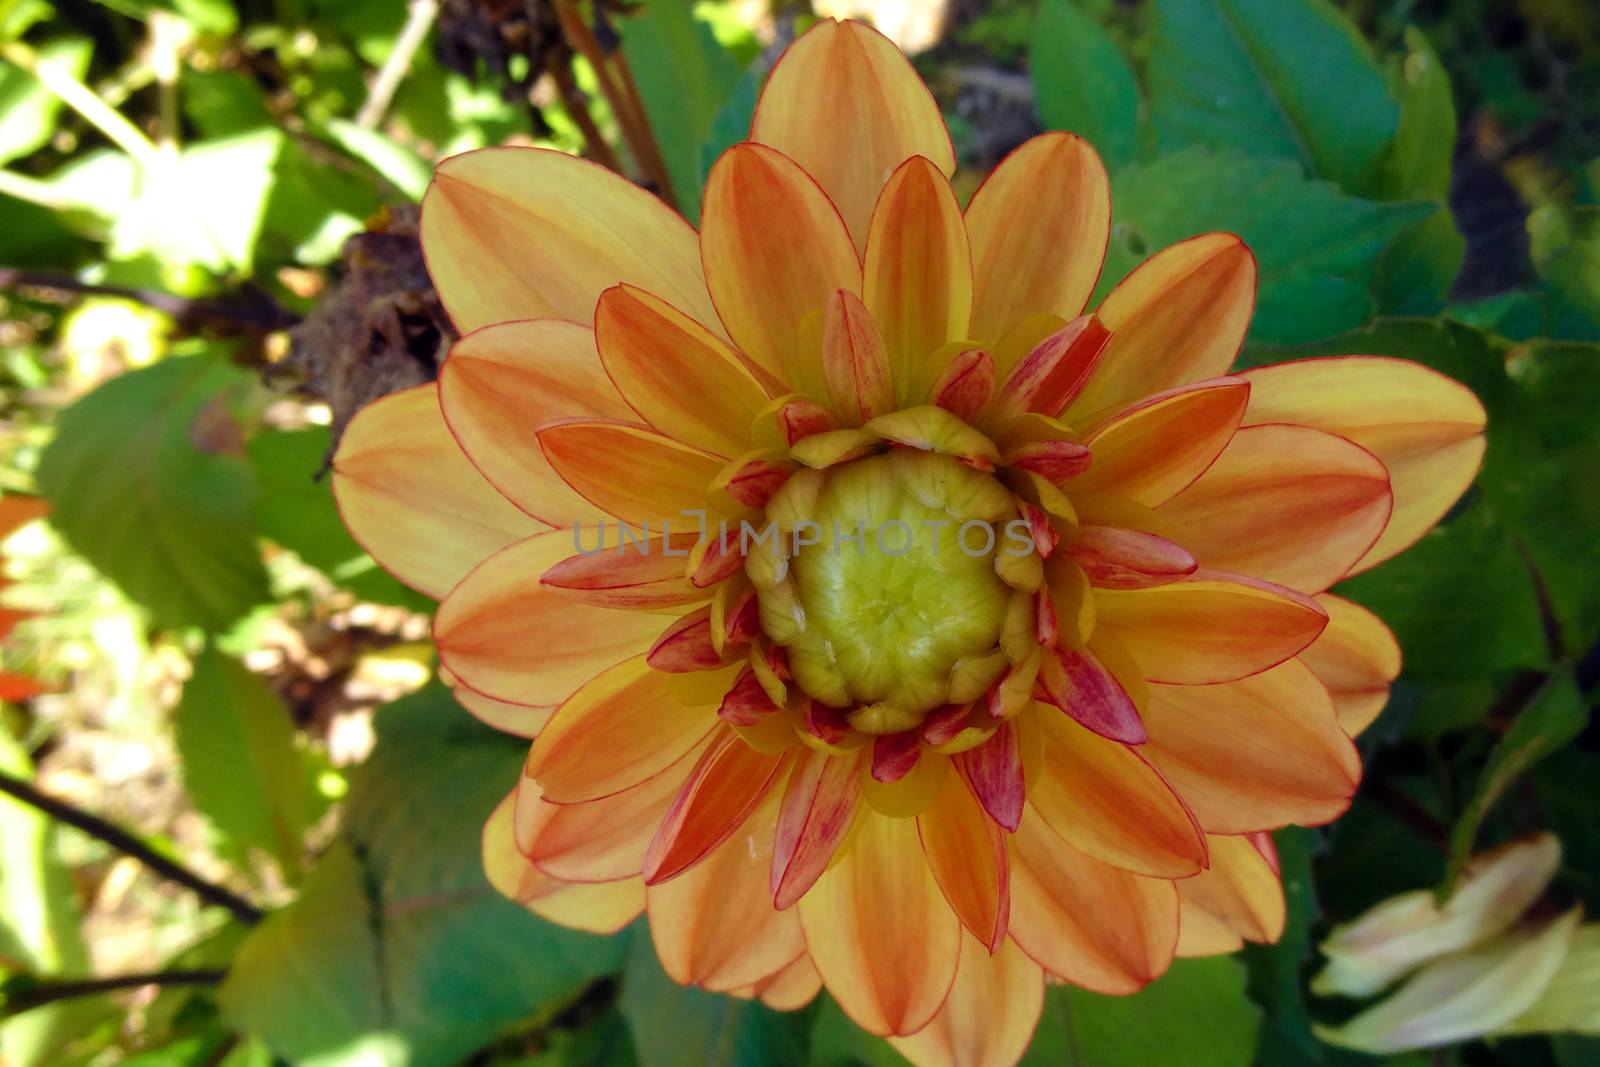 Dahlia photo emphasizes texture, contrast and intricate abstract floral patterns